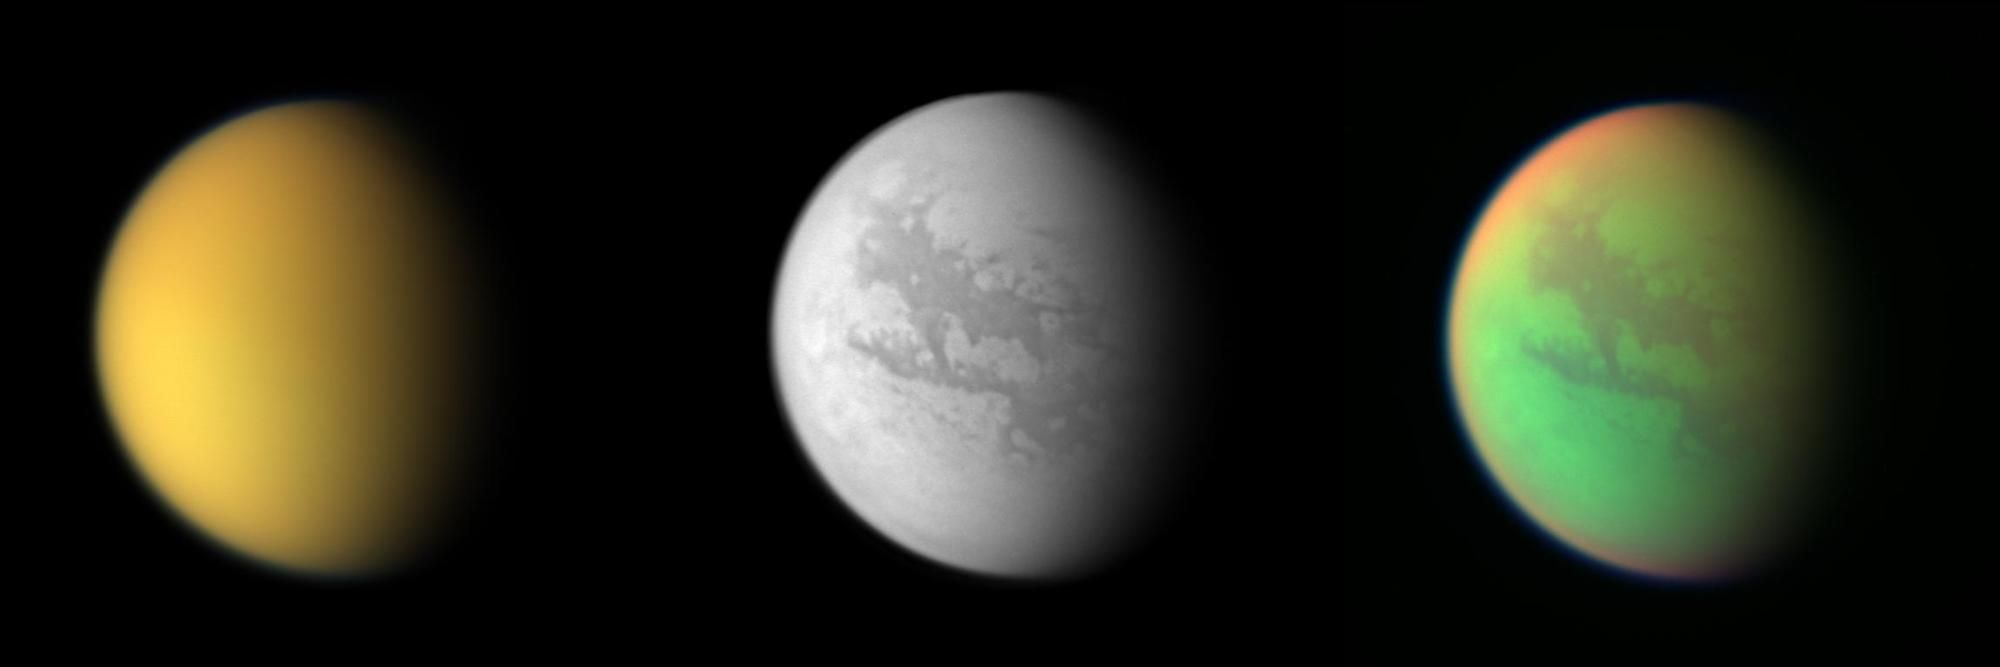 These three views of Titan from the Cassini spacecraft illustrate how different the same place can look in different wavelengths of light.